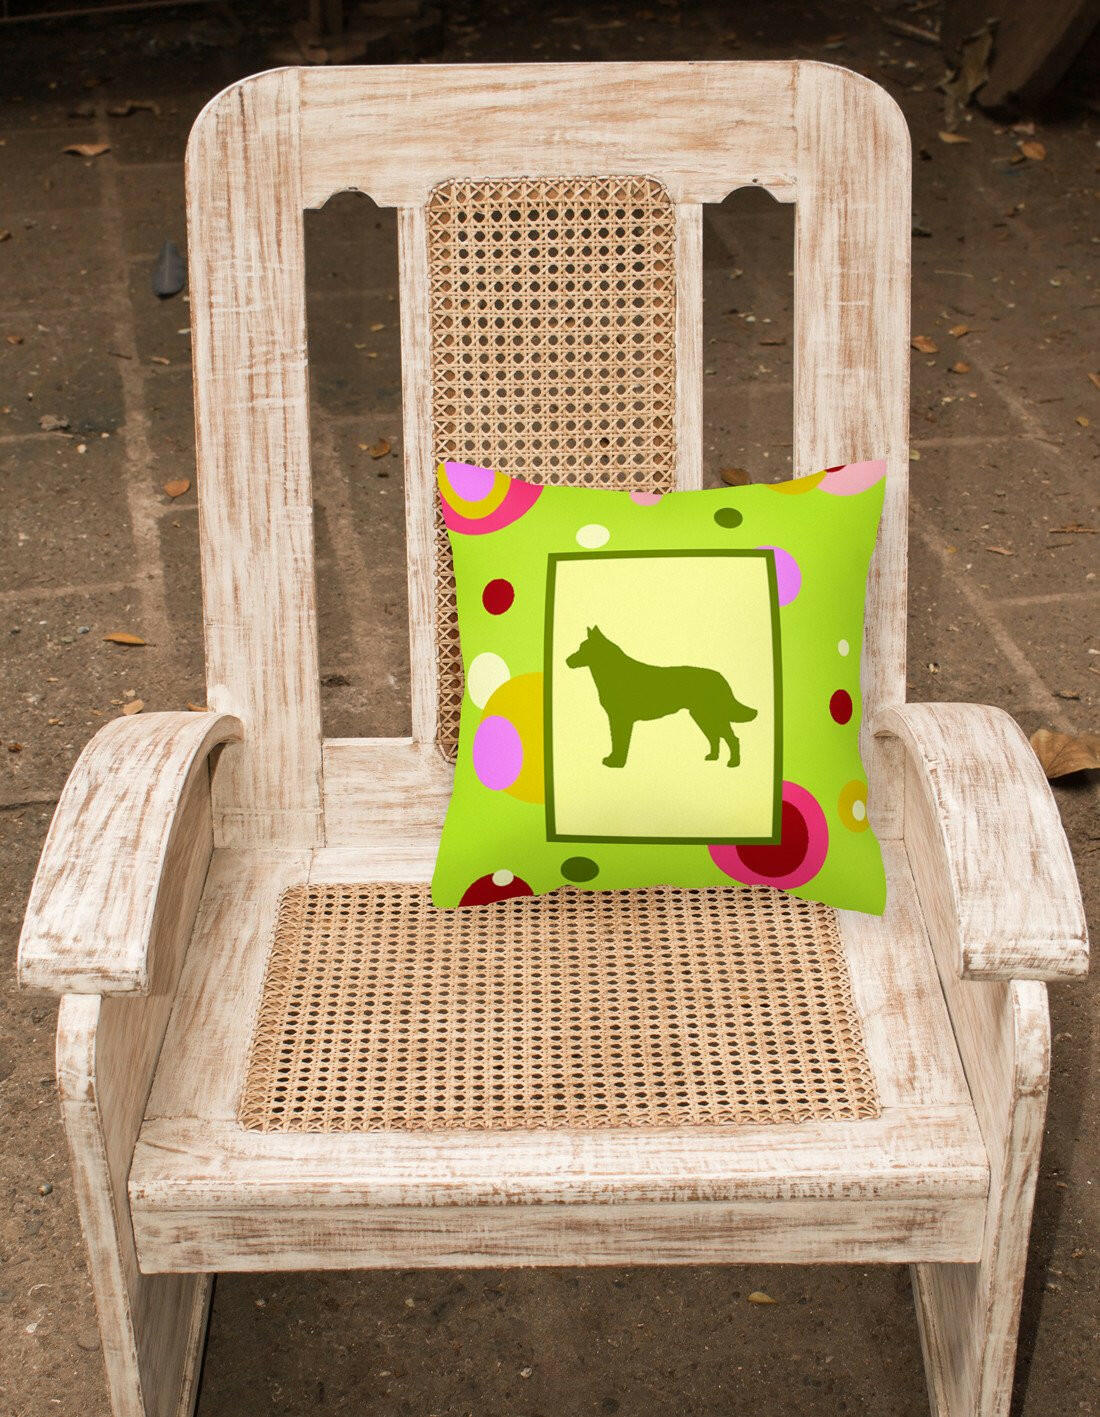 Lime Green Dots Malinois Fabric Decorative Pillow CK1114PW1414 by Caroline's Treasures